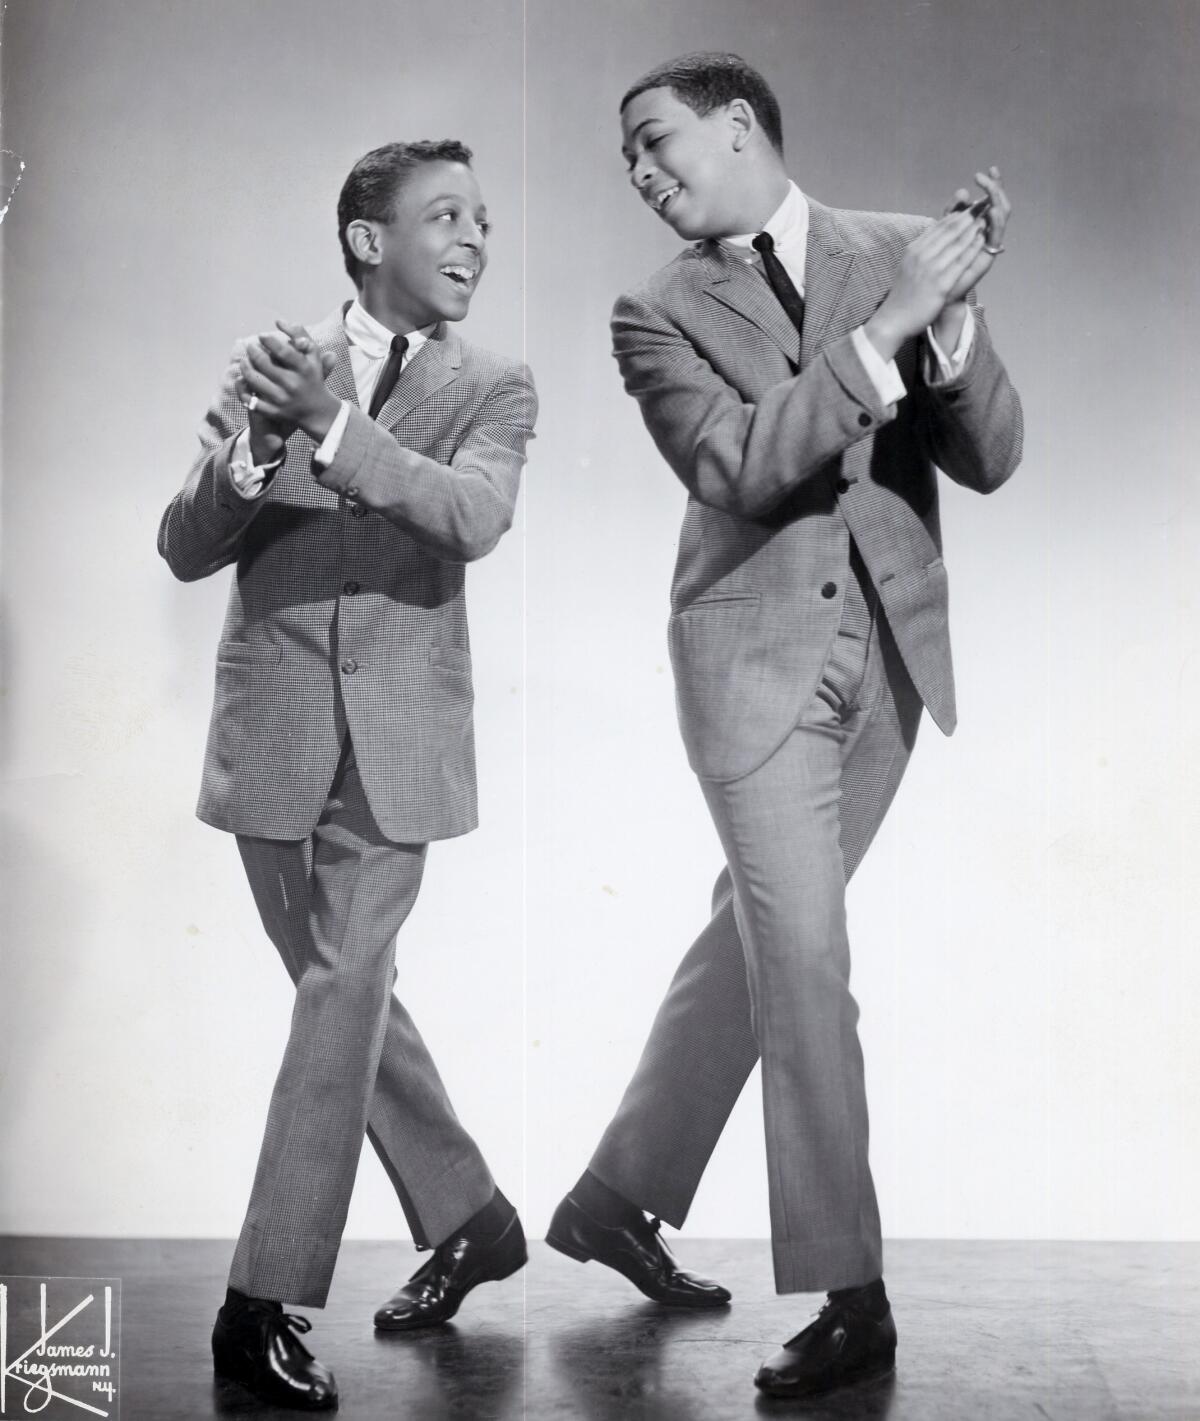 The young Hines brothers stand with hands clasped and feet in matching positions, looking at each other over one shoulder.